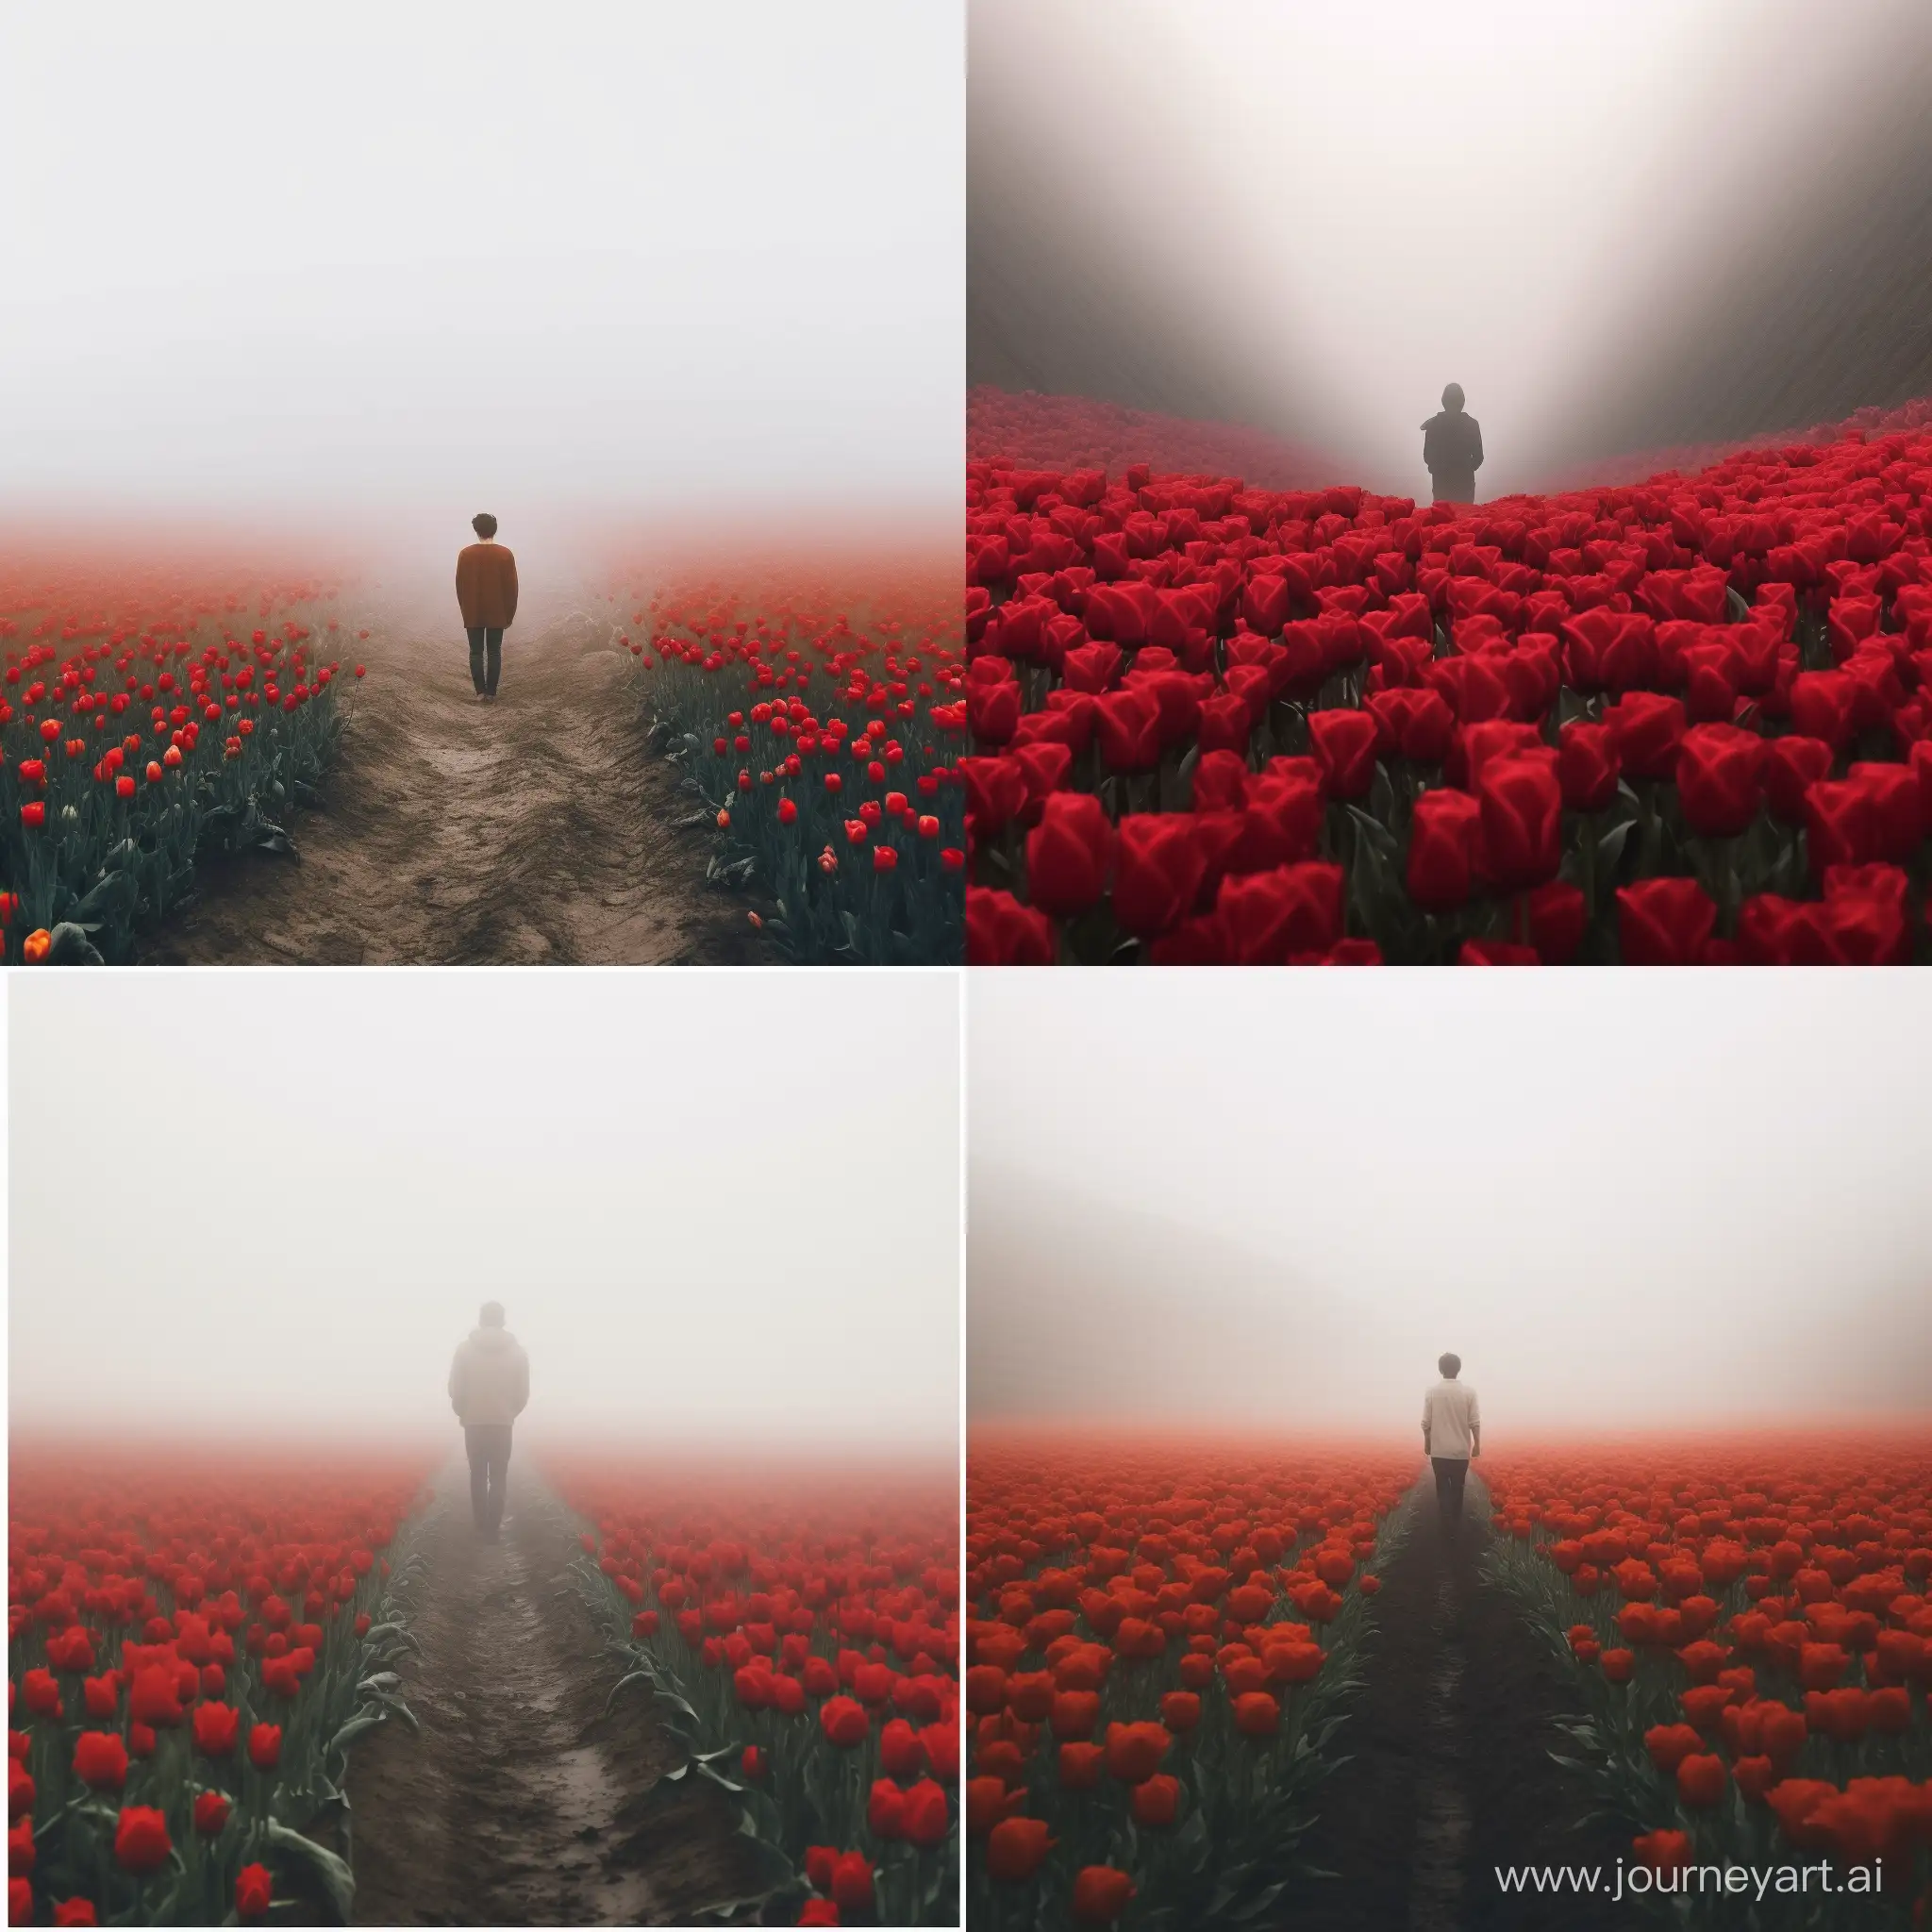 Solitary-Figure-Amidst-Enchanting-Red-Tulip-Fields-in-Thick-Fog